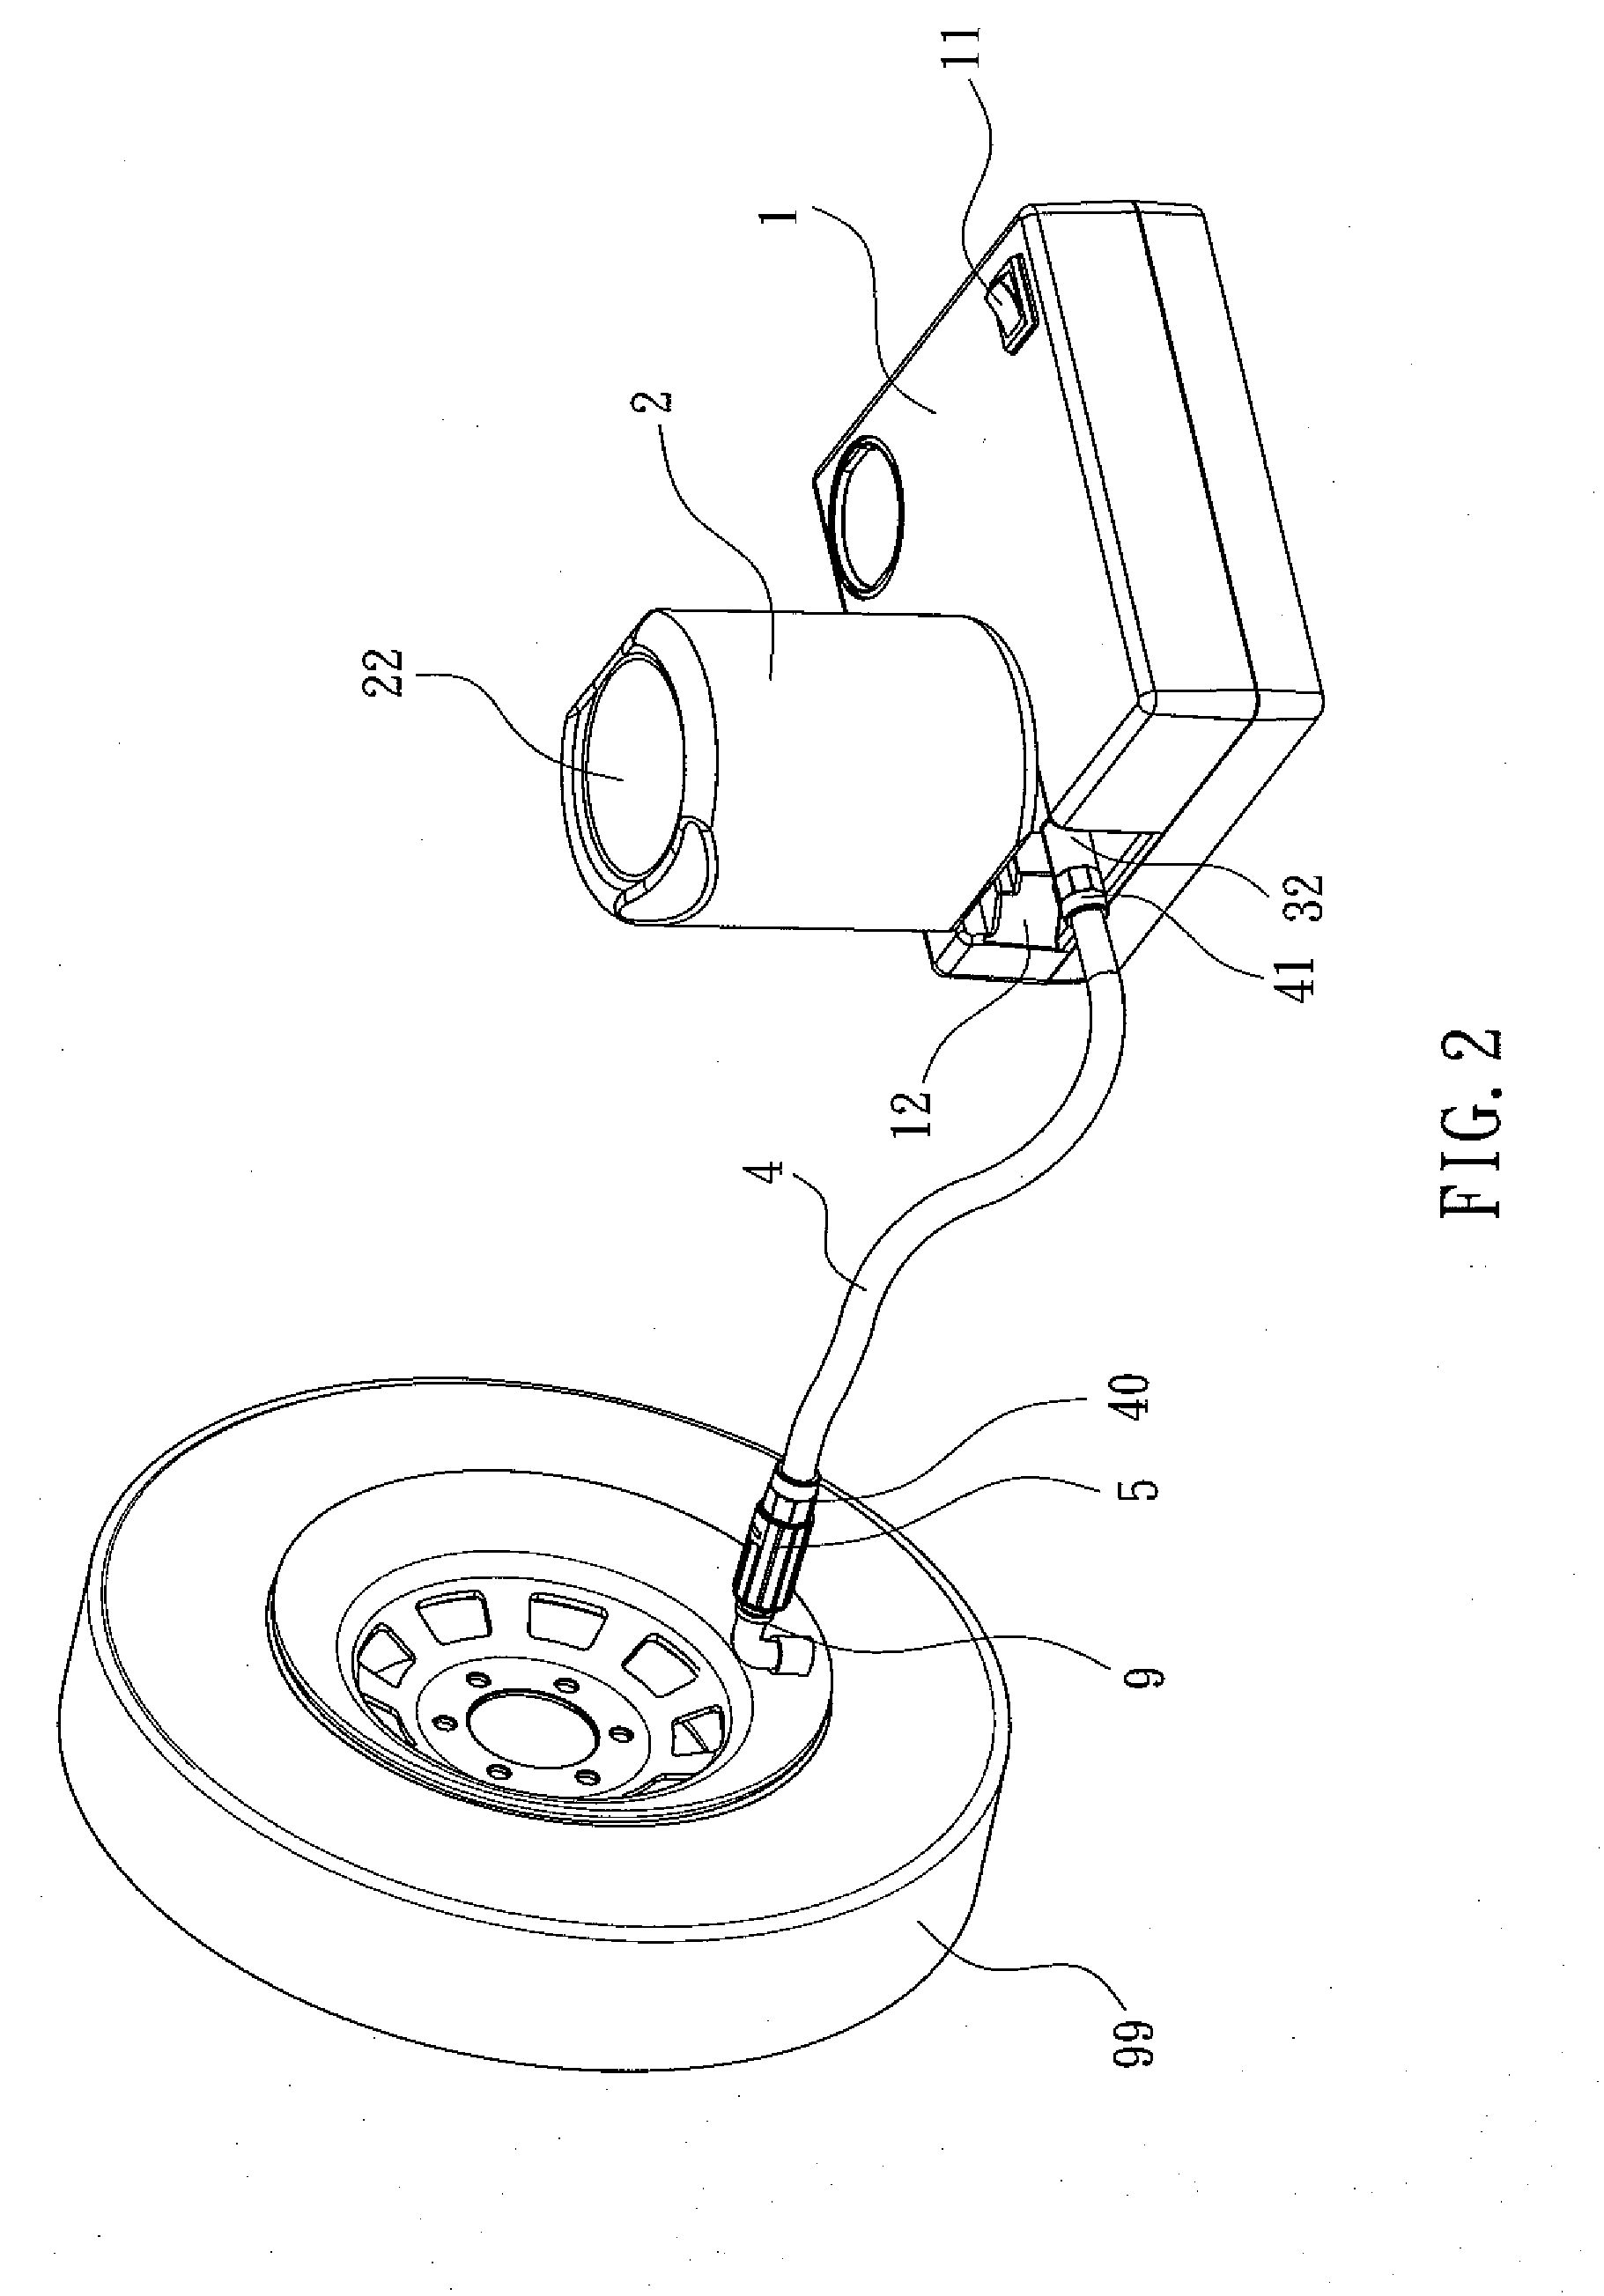 Vehicle-carried Air Compression Device